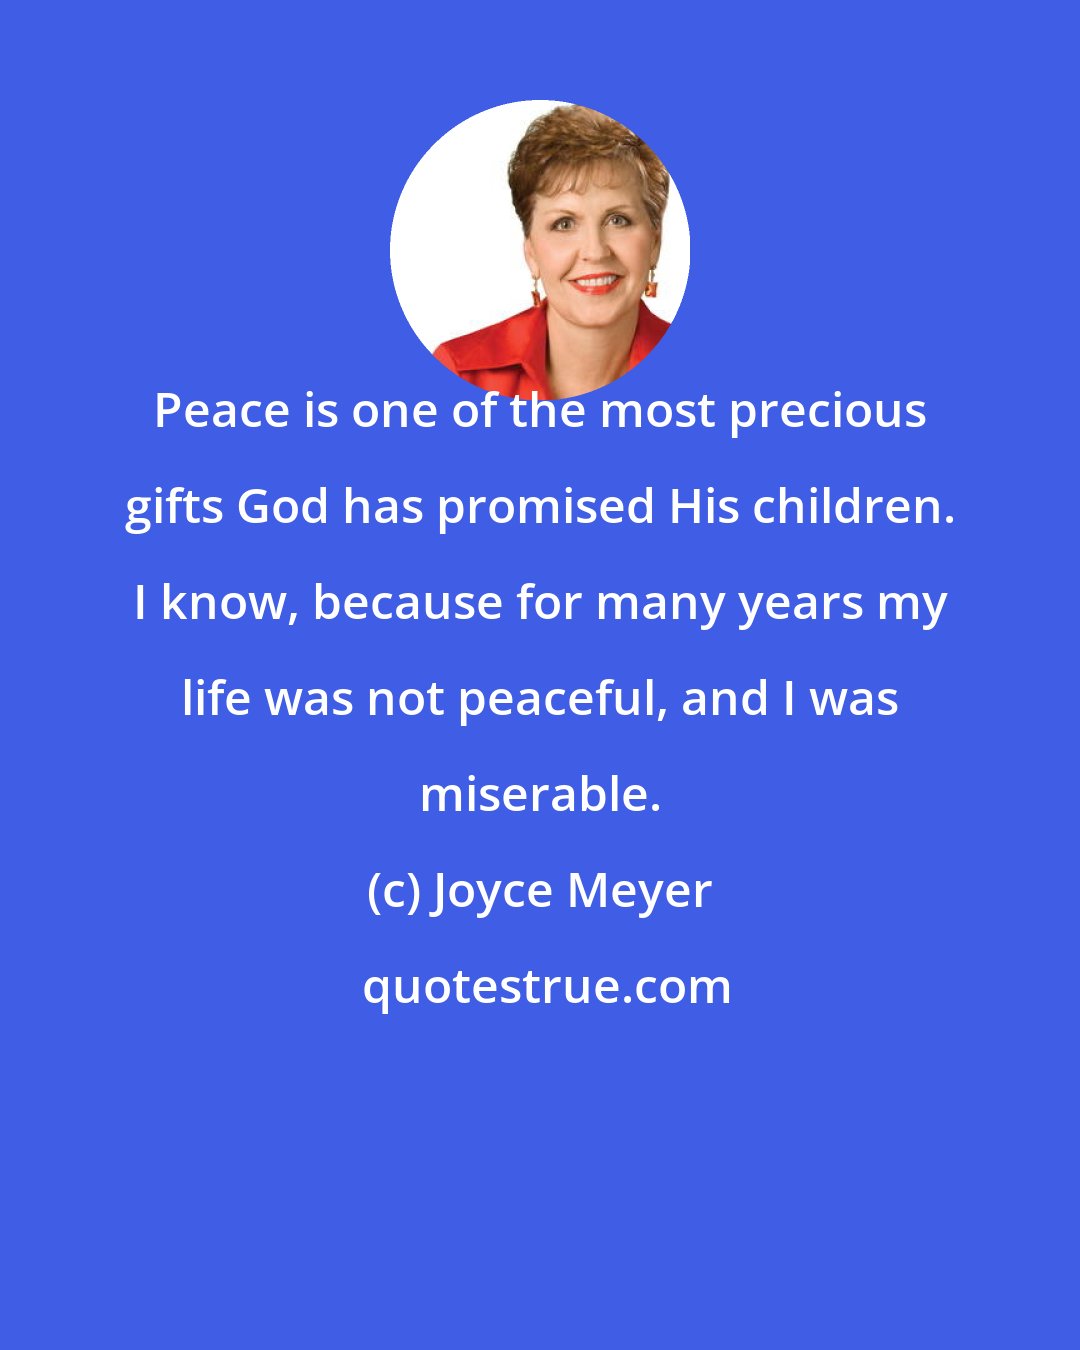 Joyce Meyer: Peace is one of the most precious gifts God has promised His children. I know, because for many years my life was not peaceful, and I was miserable.